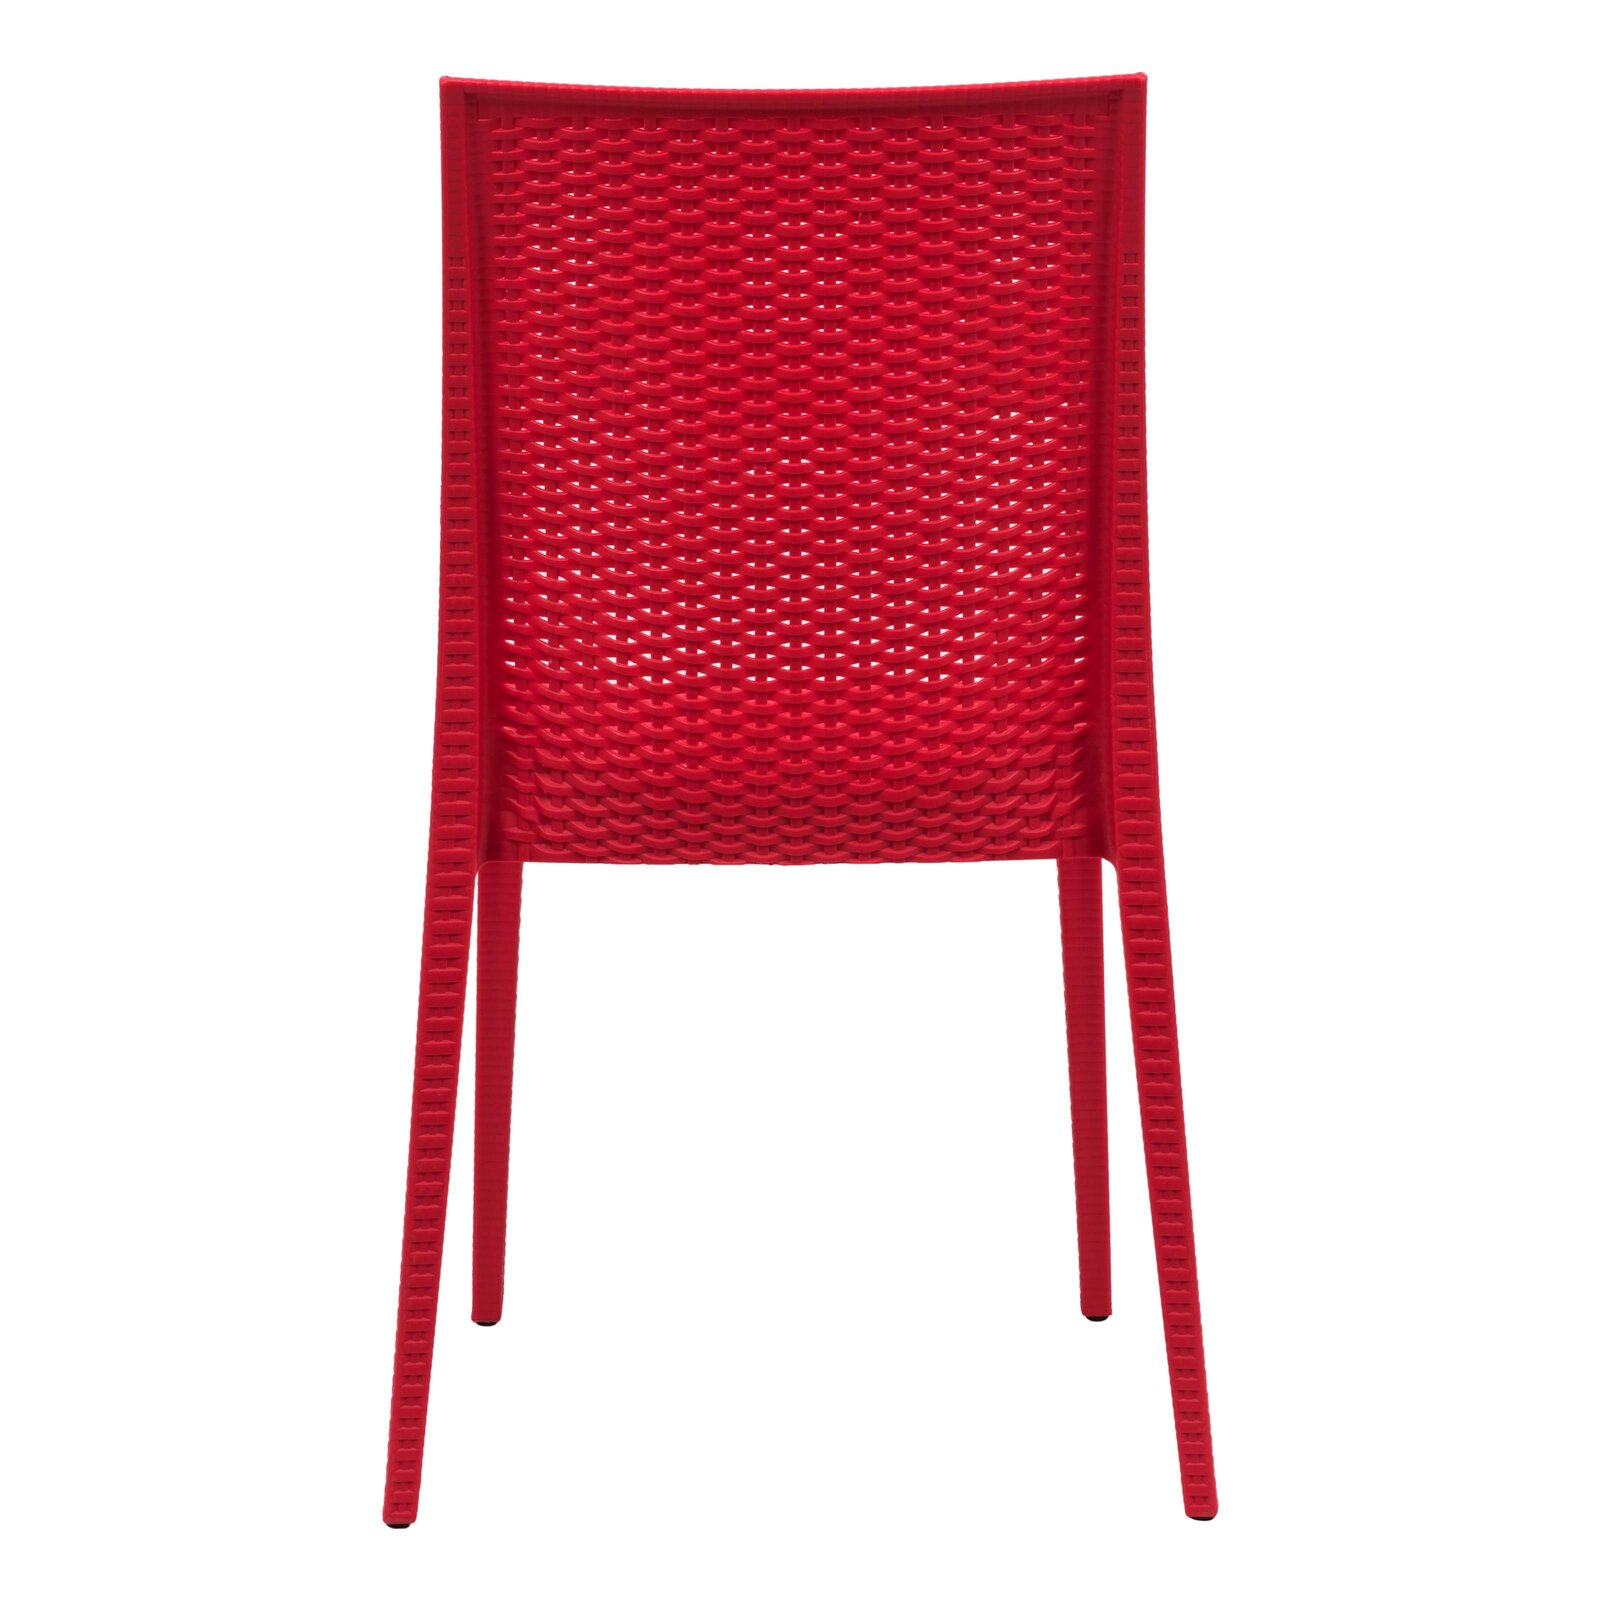 Quade Stacking Patio Dining Chair, Assembled, Suitable for indoor and outdoor use - image 5 of 6